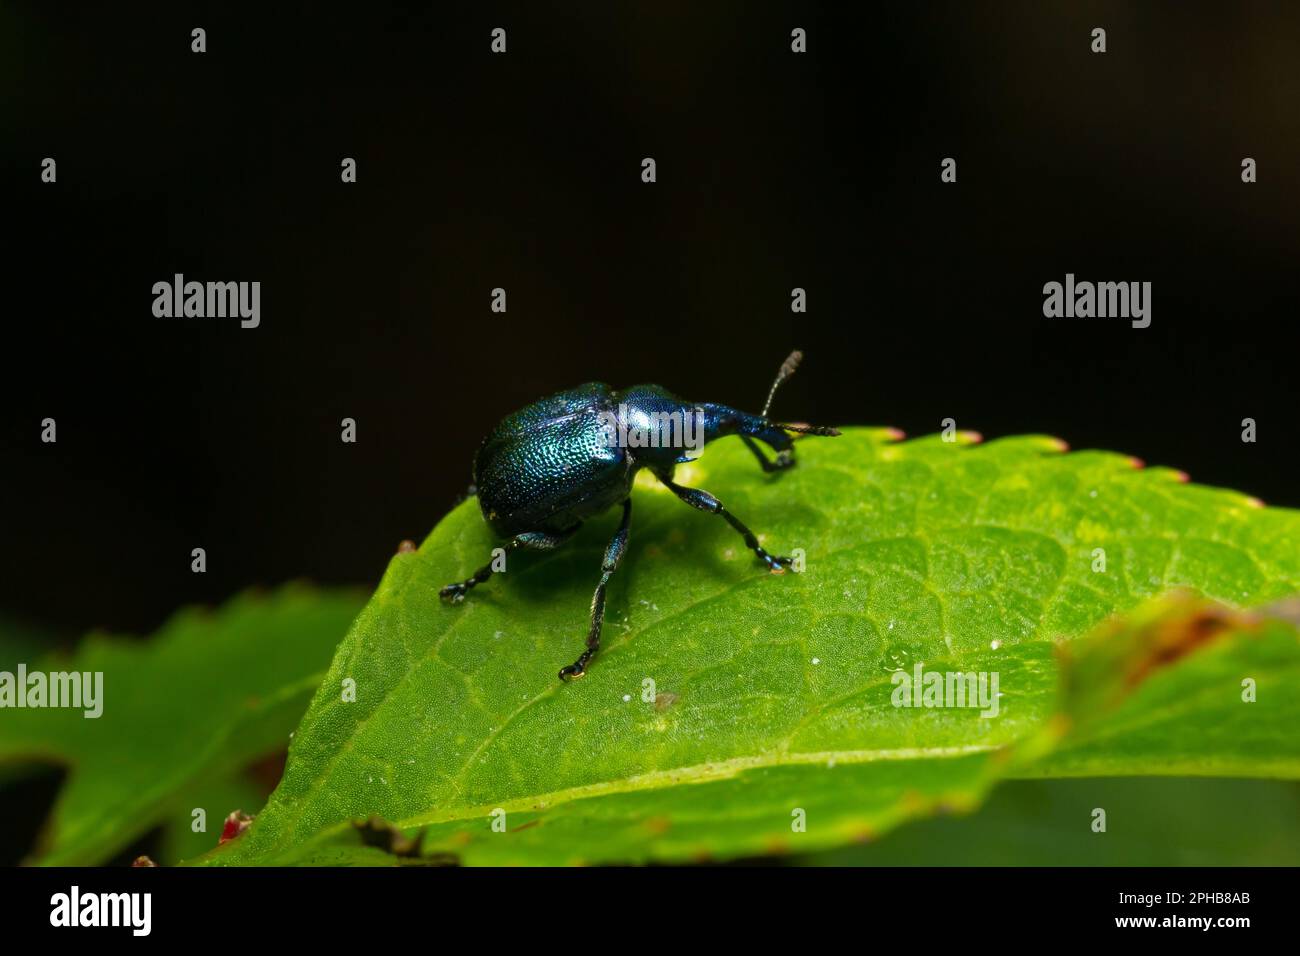 Weevil Beetle Rhynchites bacchus on a green leaf. Pest for fruit trees. a problem for gardeners and farmers. Stock Photo